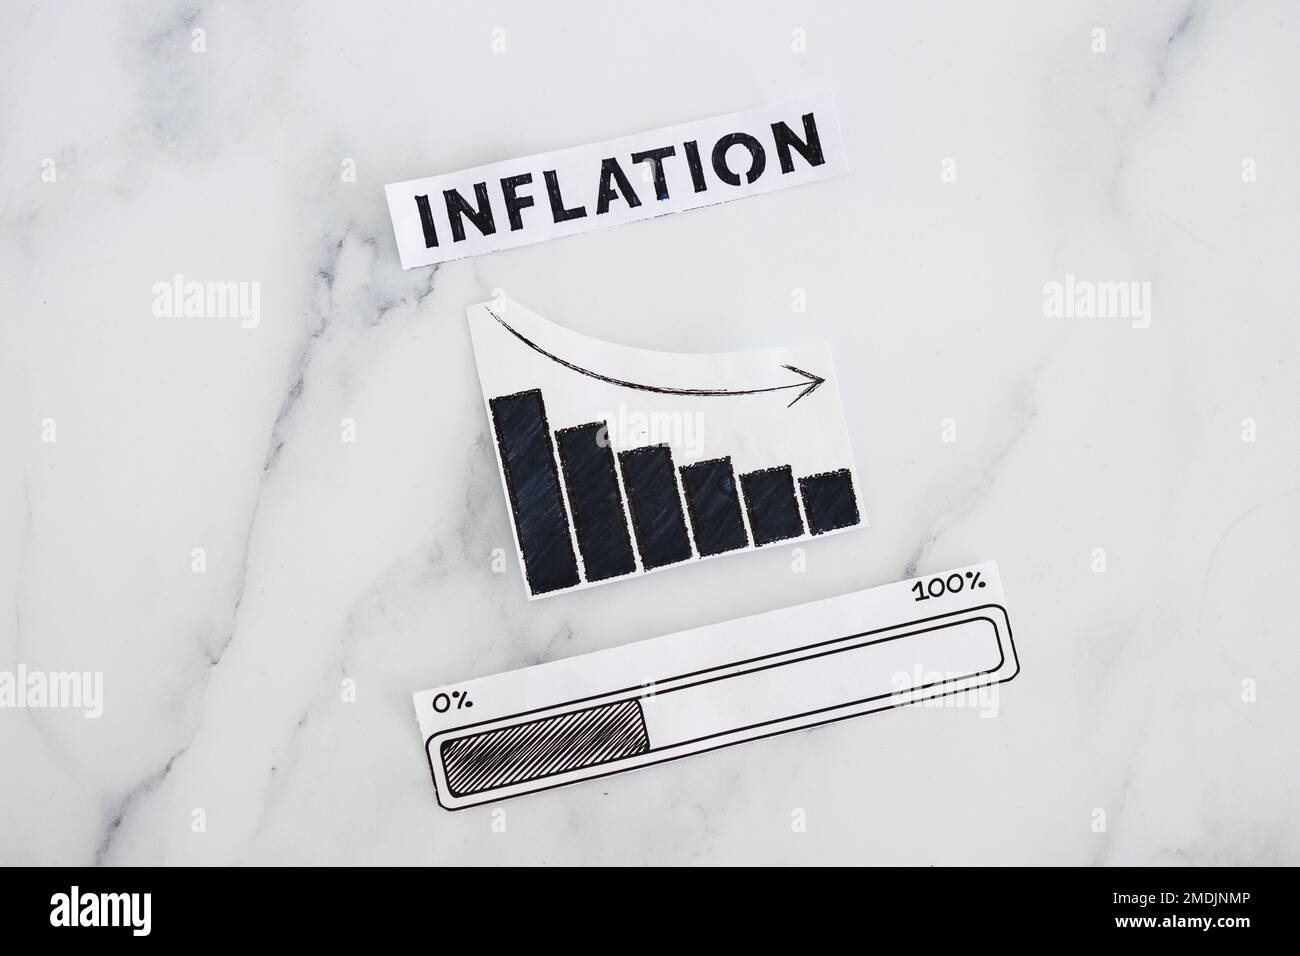 inflation rates going down, text with graph showing stats decreasing and progress bar loading underneath Stock Photo